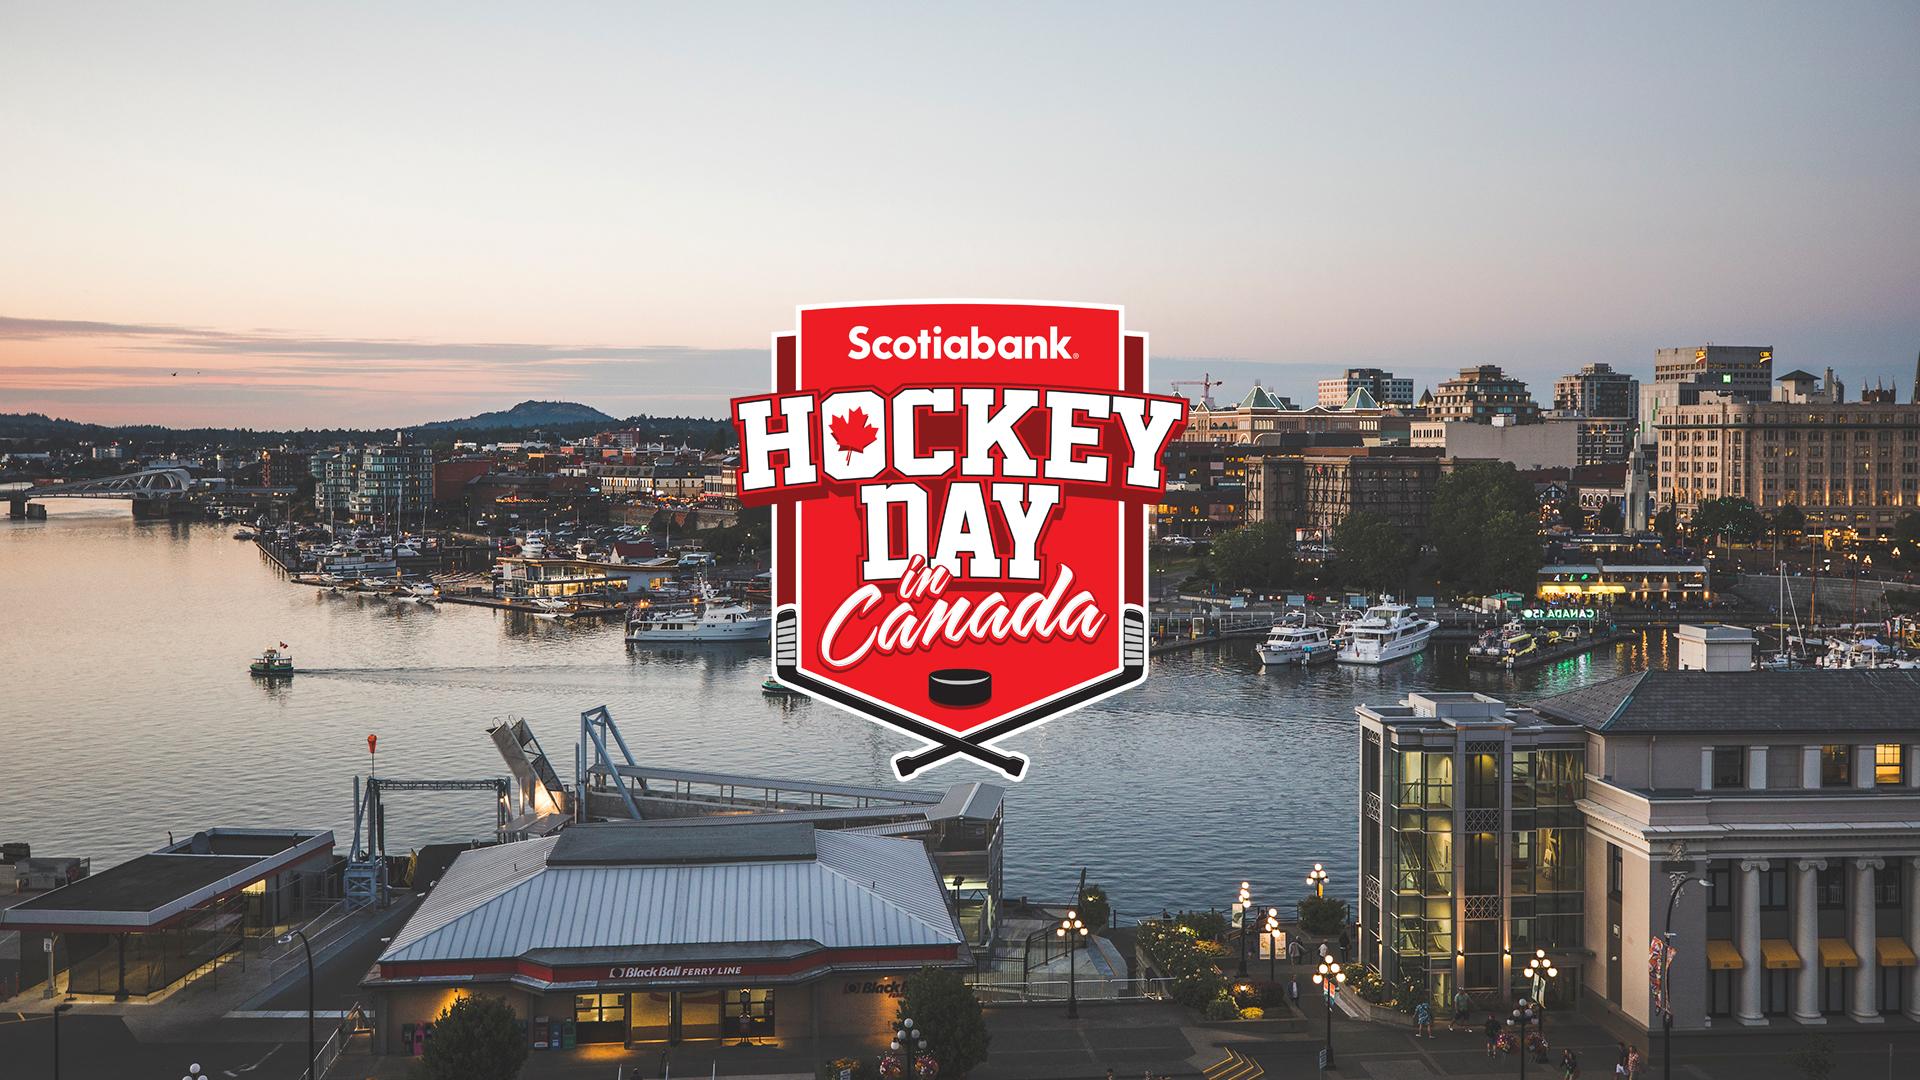 Hockey Day in Victoria, BC